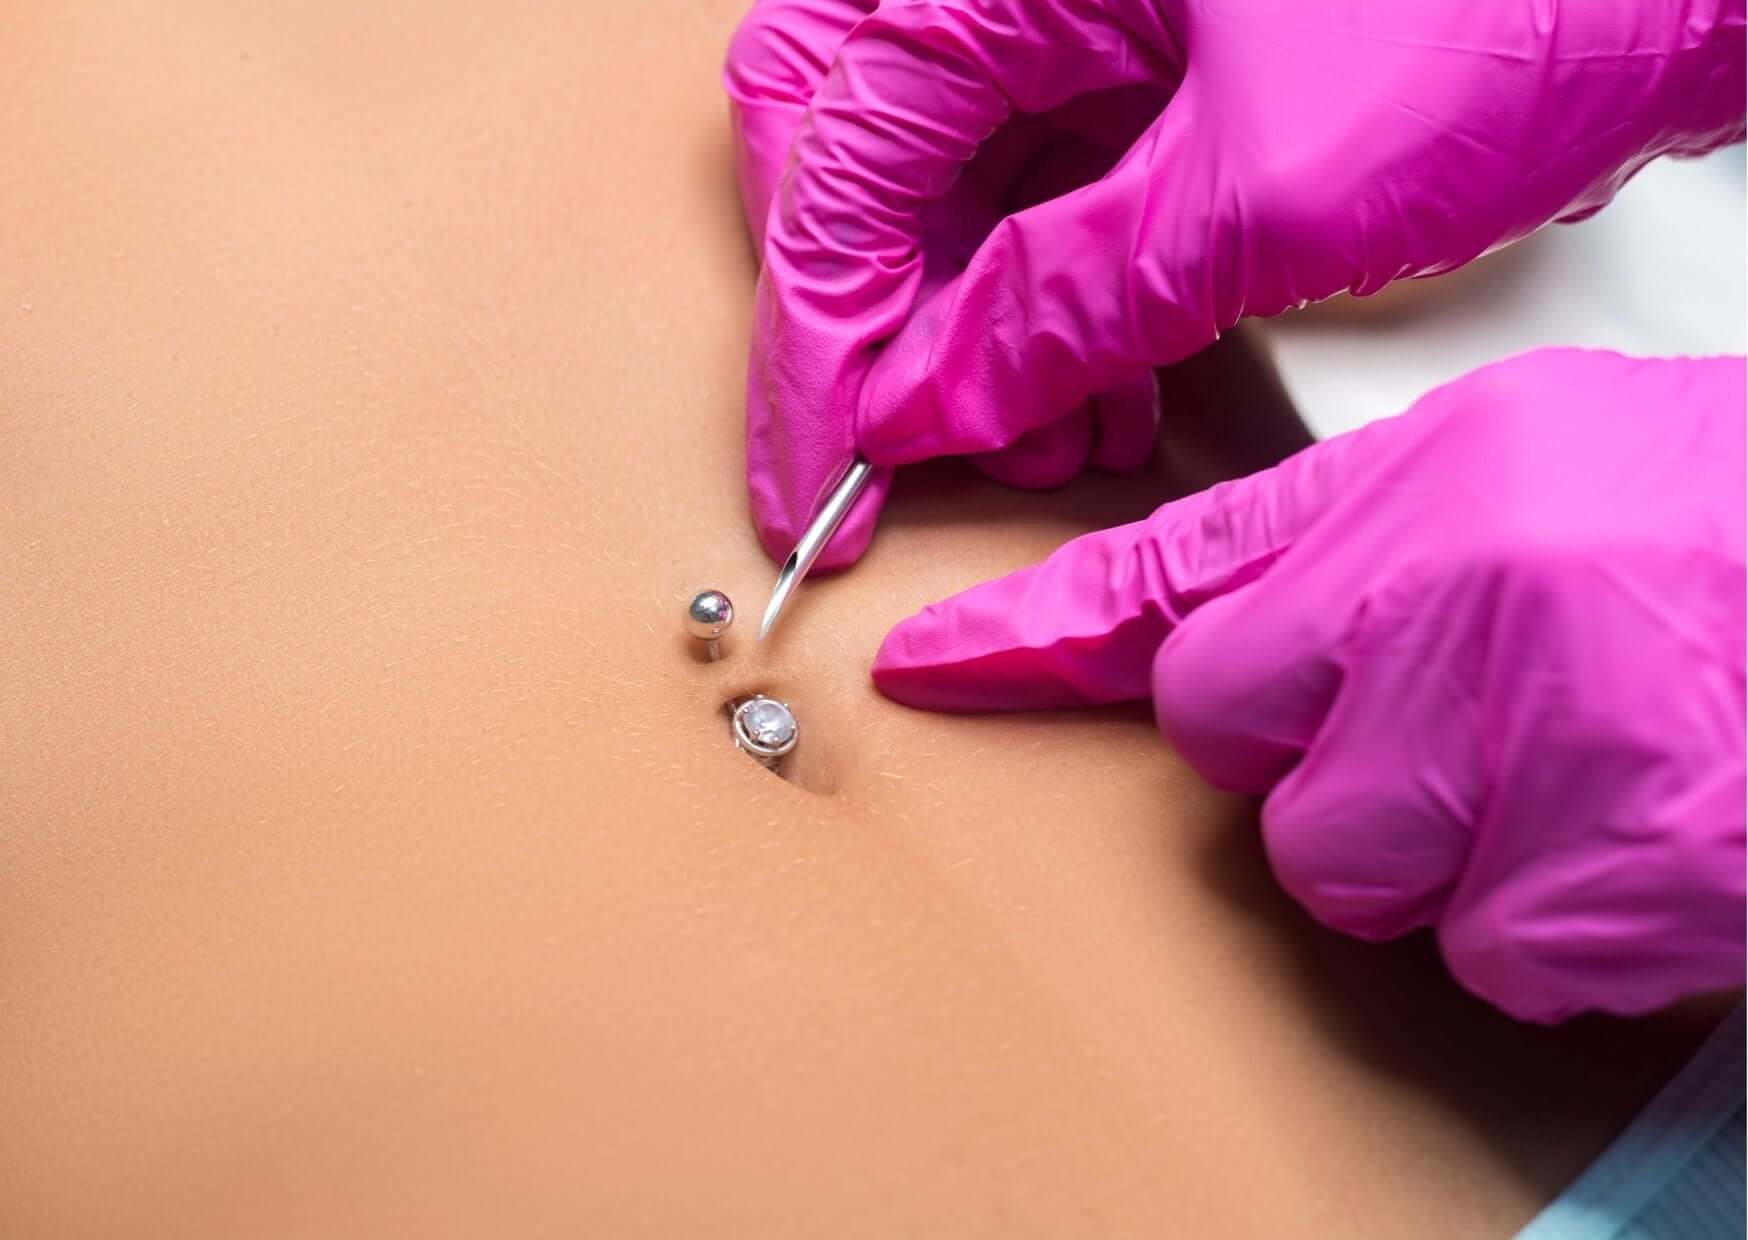 Navel & Belly Piercing Guide: What You Need to Know - Dr. Piercing Aftercare